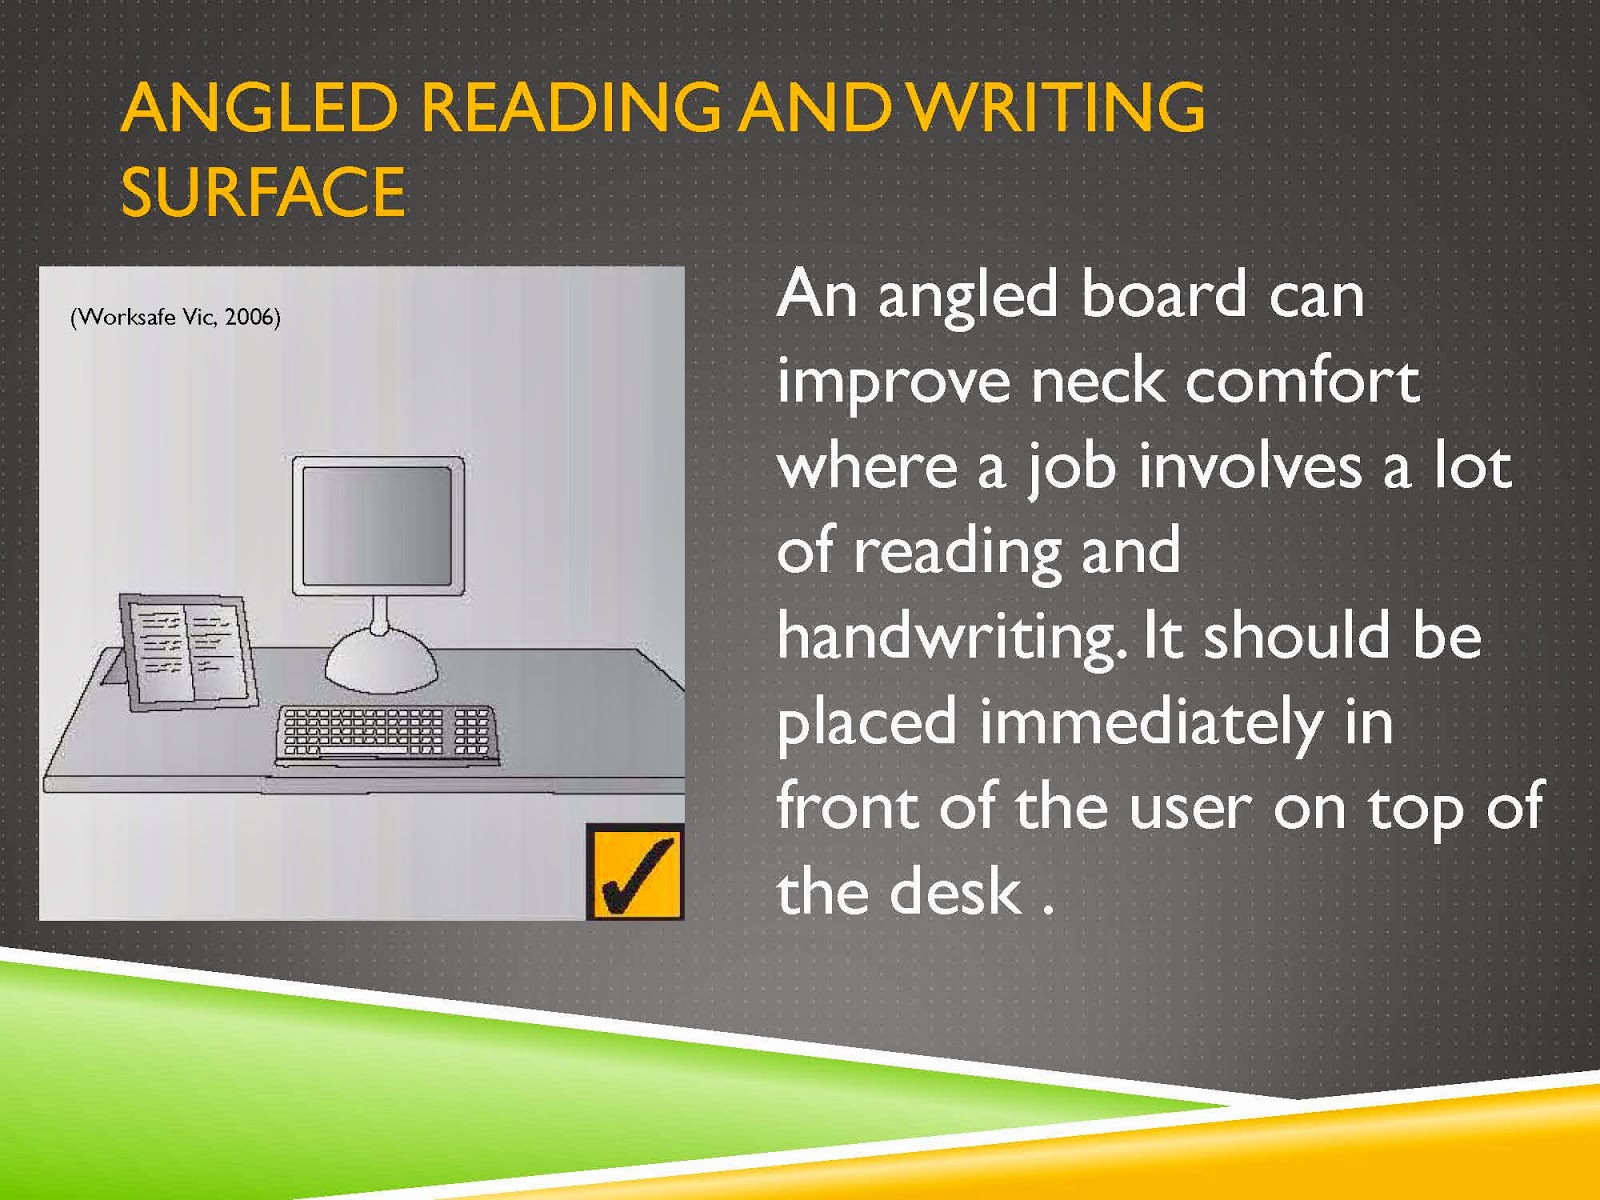 ANGLED READING AND WRITING SURFACE